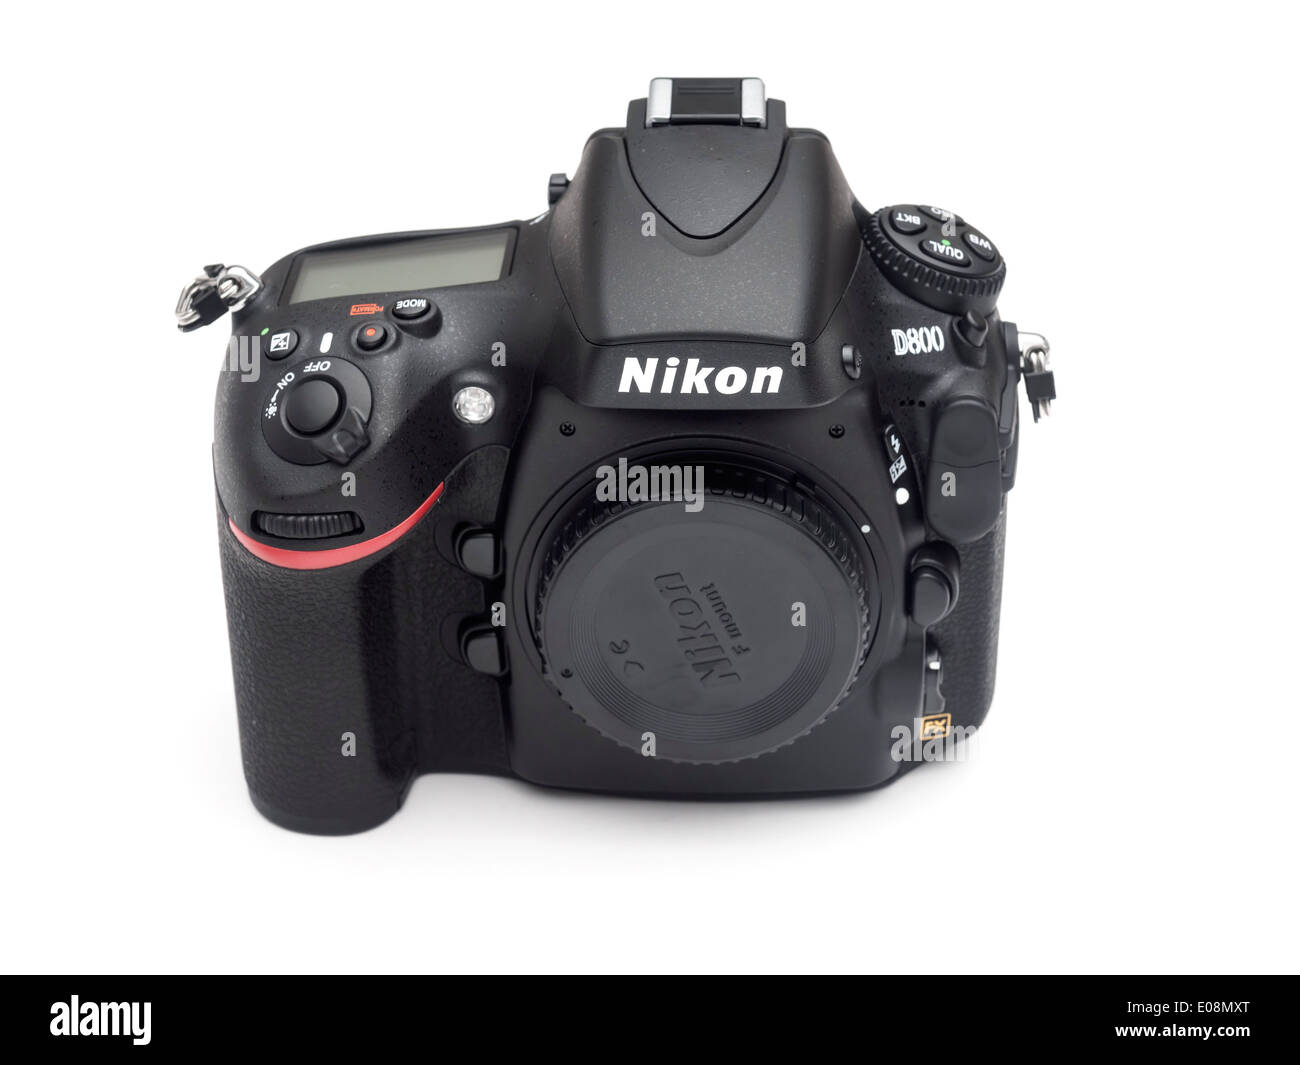 Front view of a Nikon D800 digital camera cutout on white background Stock Photo